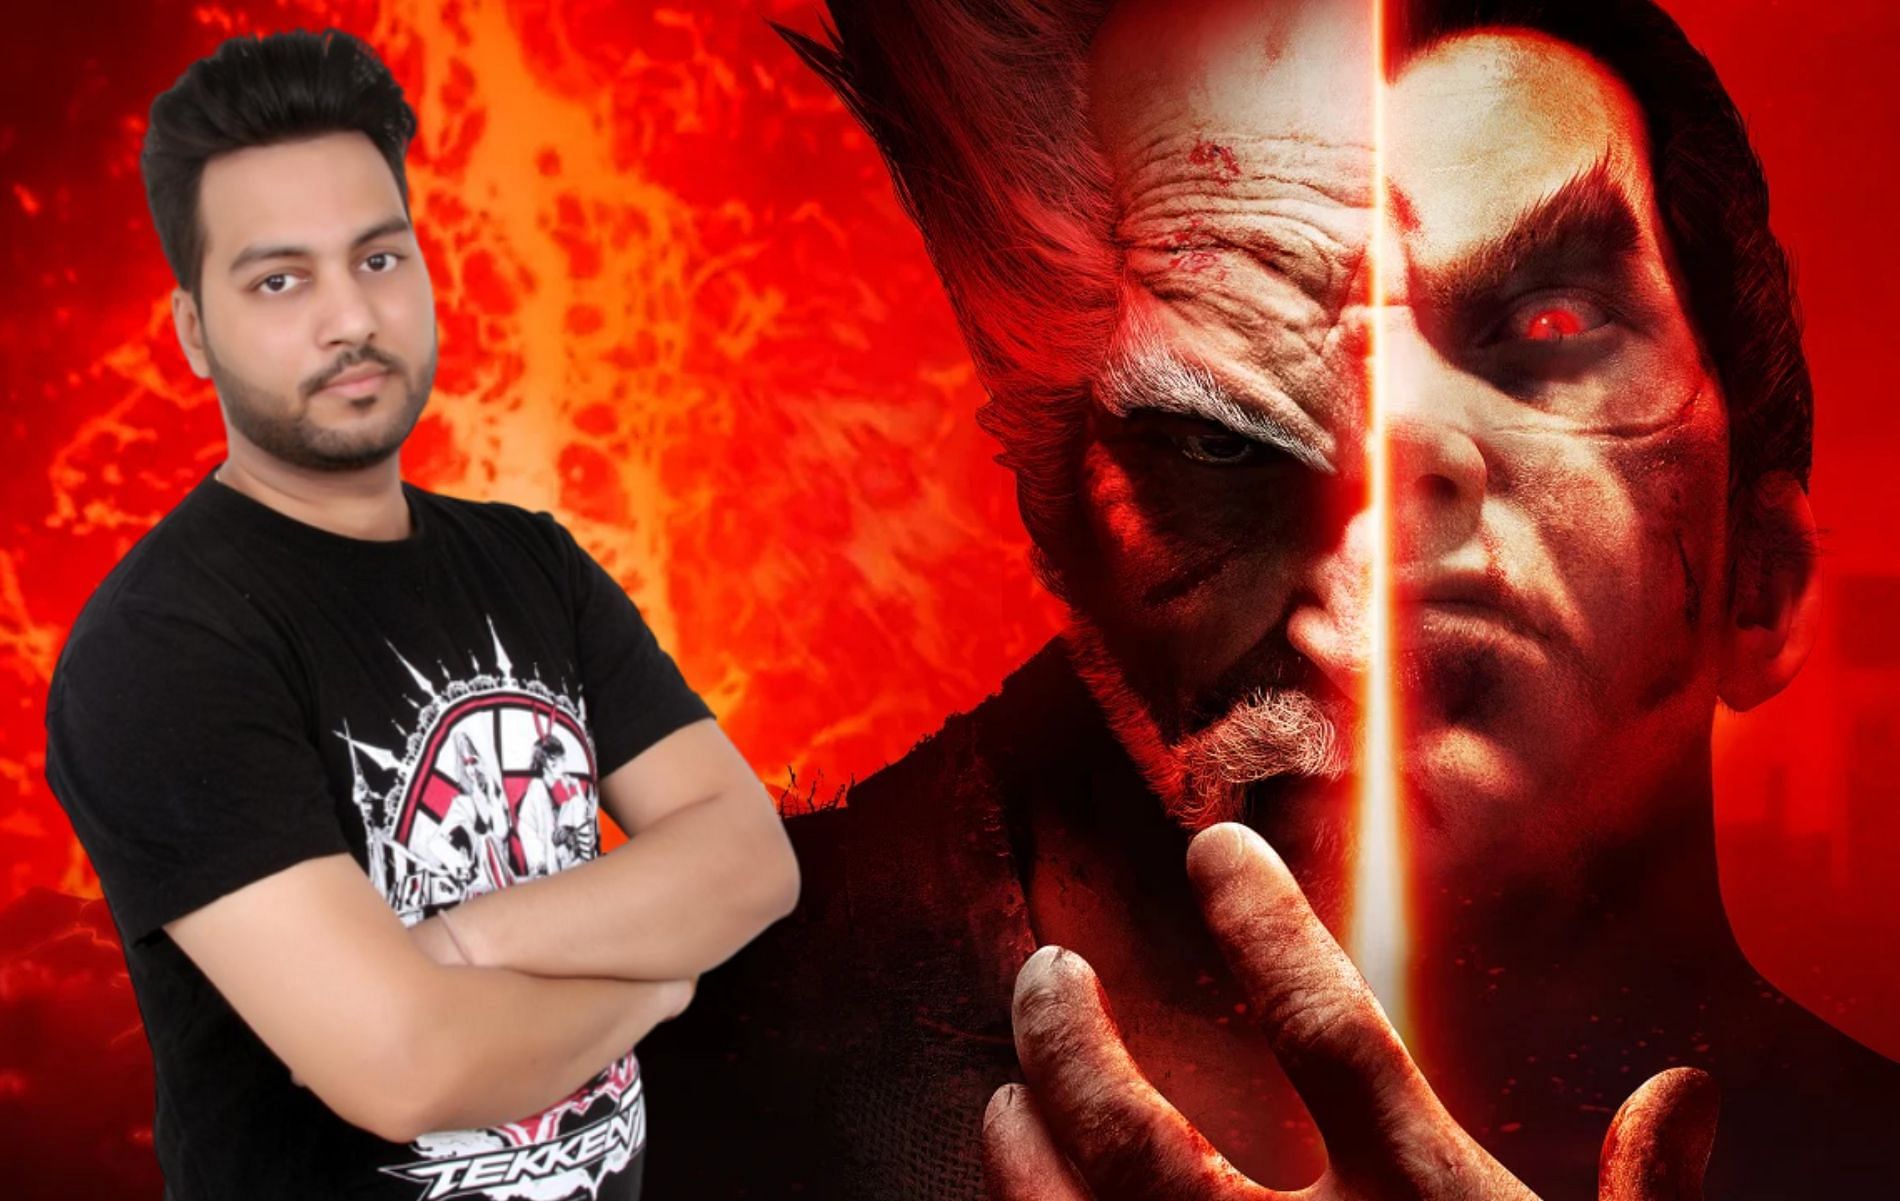 The Tekken 7 player shares some insight into his recent tournament as wella s thoughts about the Indian FGC (Images via Bandai Namco/Rohit Jain)